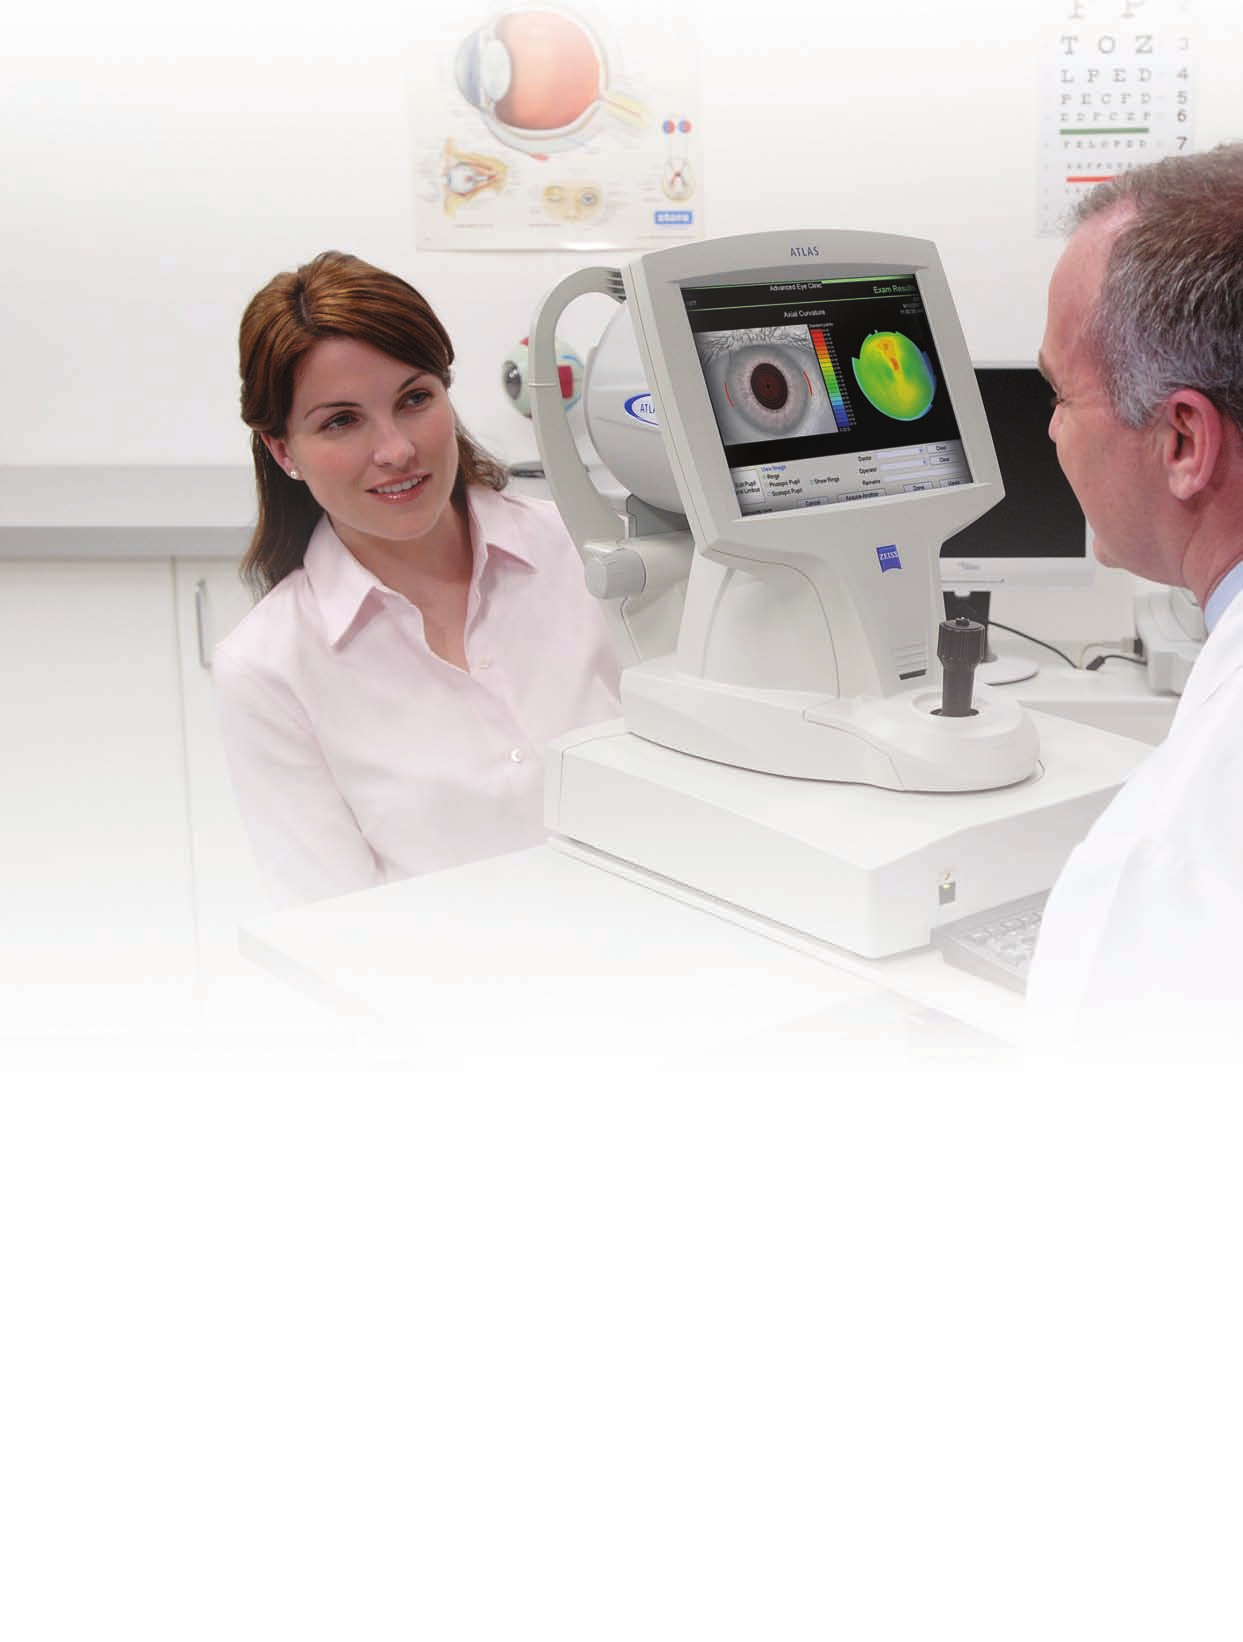 The New ATLAS Take your practice to the next level Carl Zeiss Meditec has taken the world s leading corneal topography system 1 and made it better.